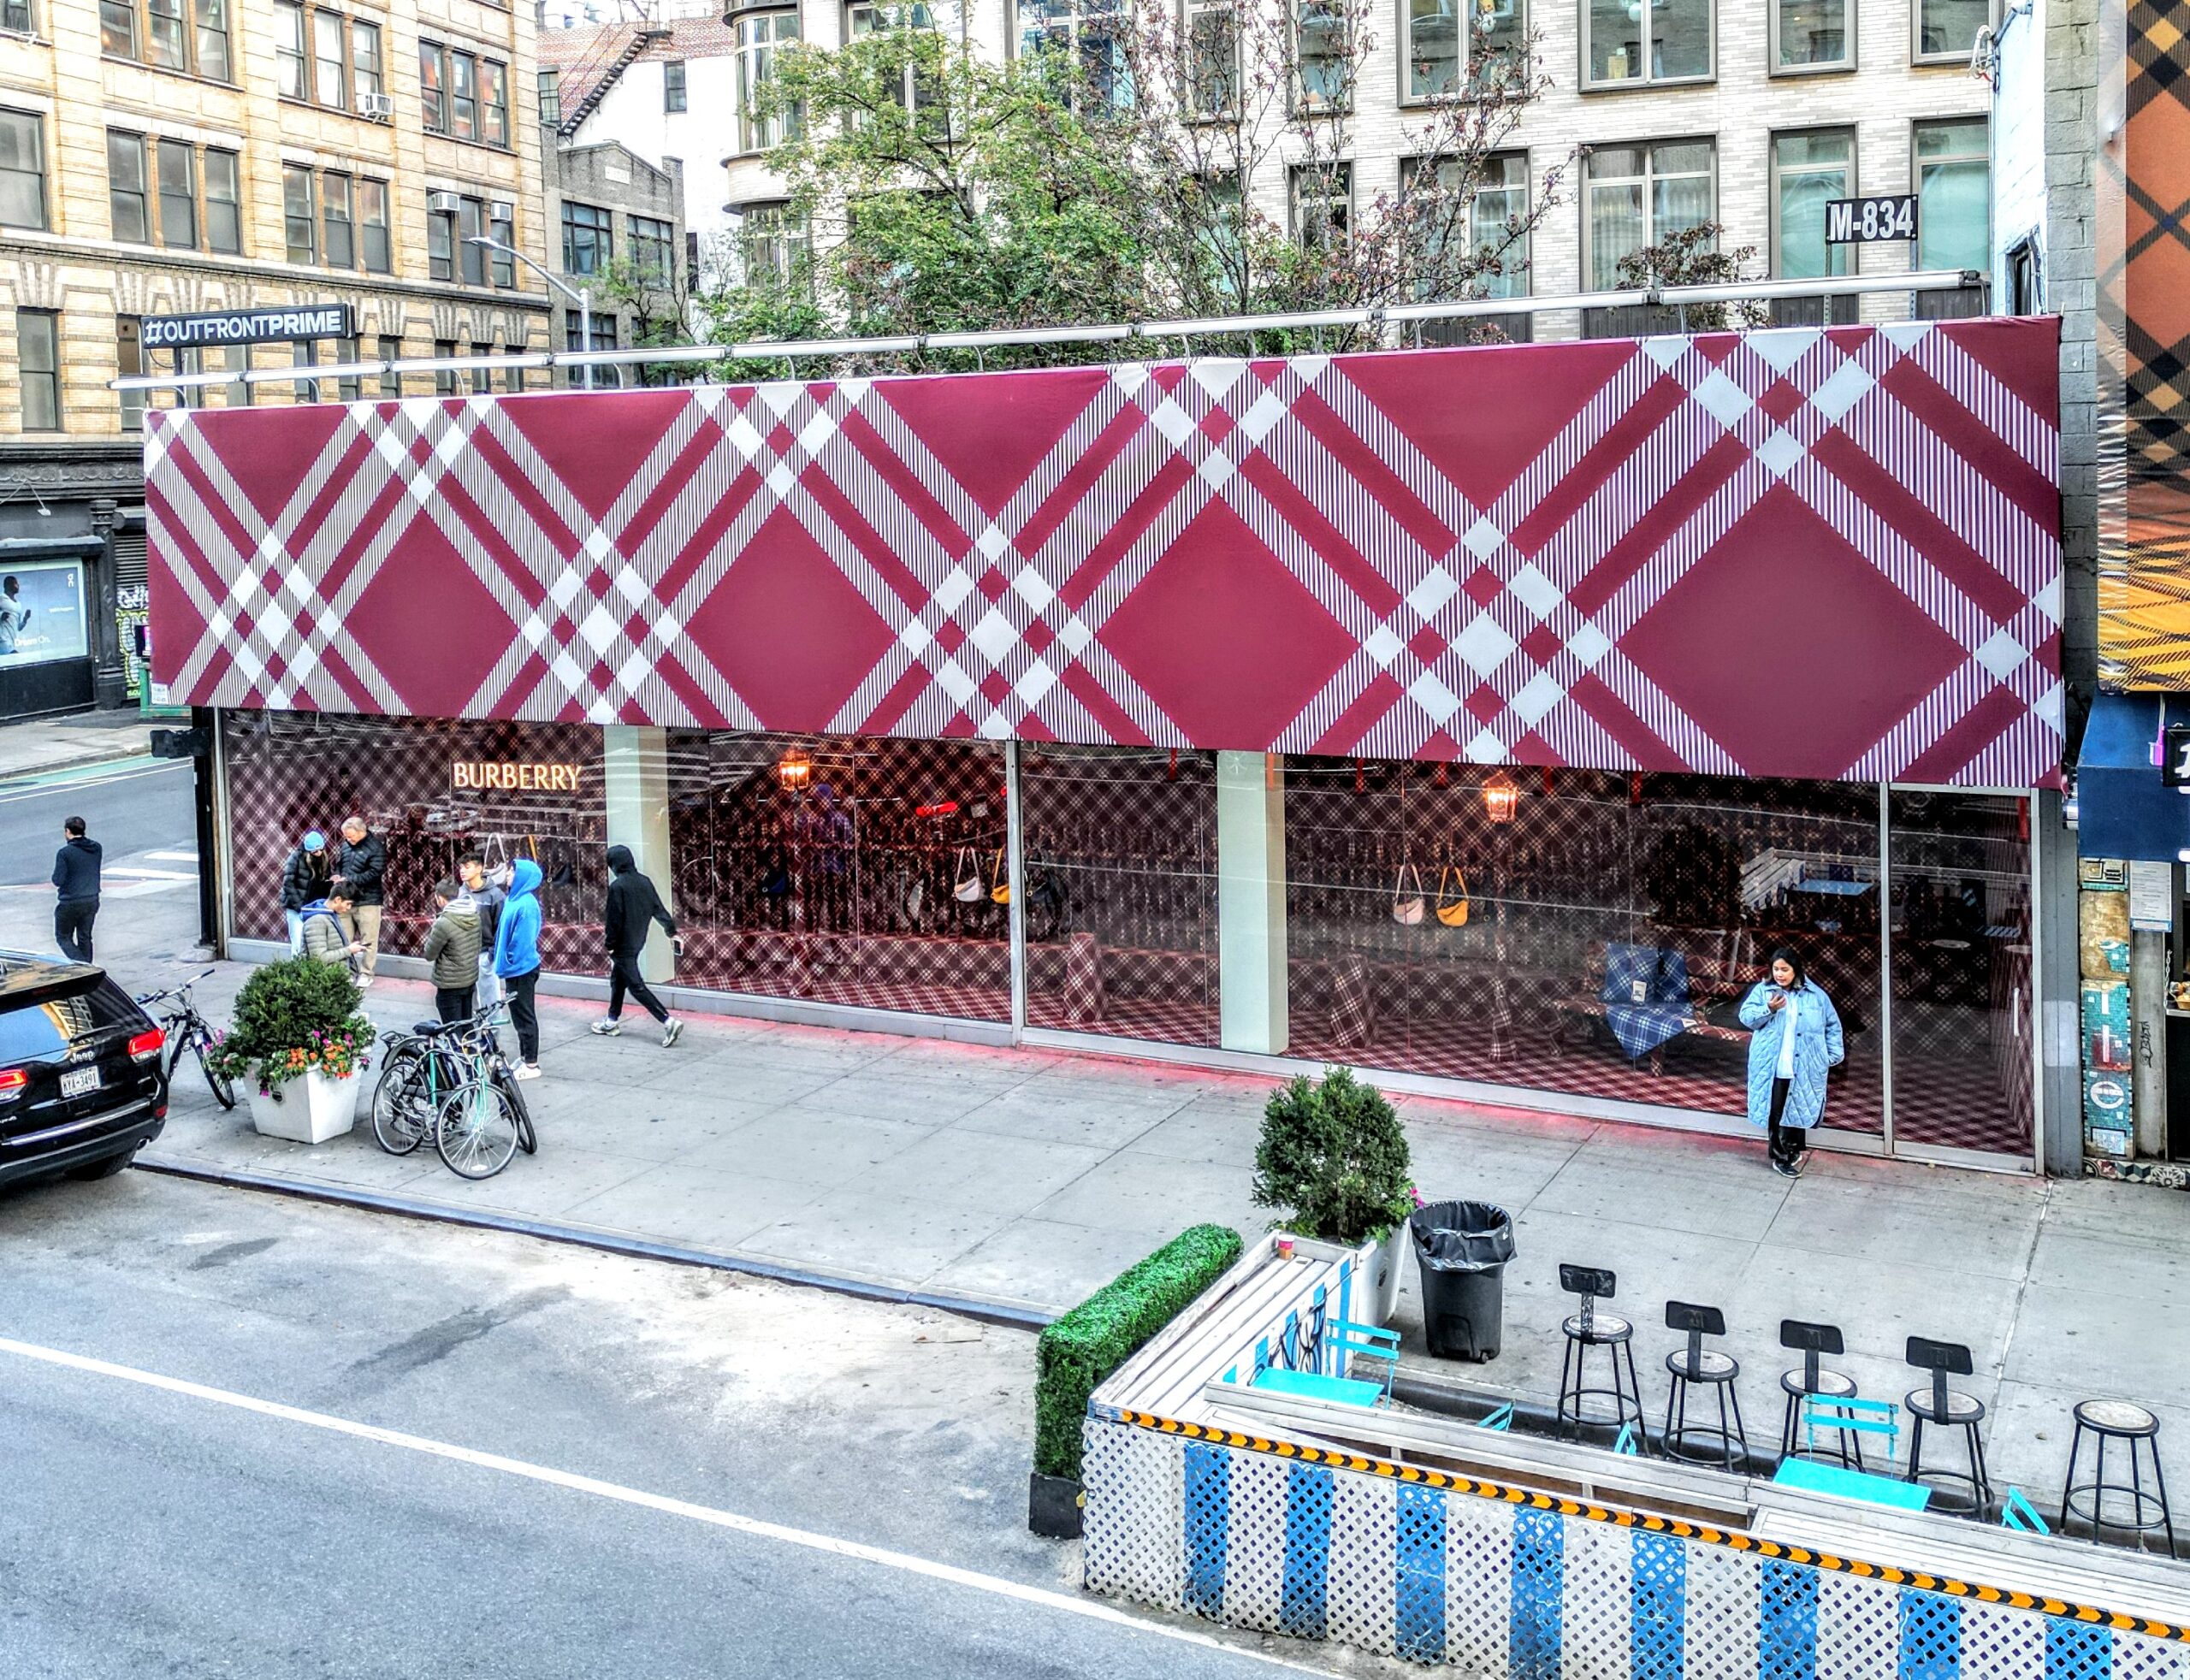 Burberry Knight Bar Takeover Event Experiential Activation Red Check Awning Lafayette & Bleecker NYC